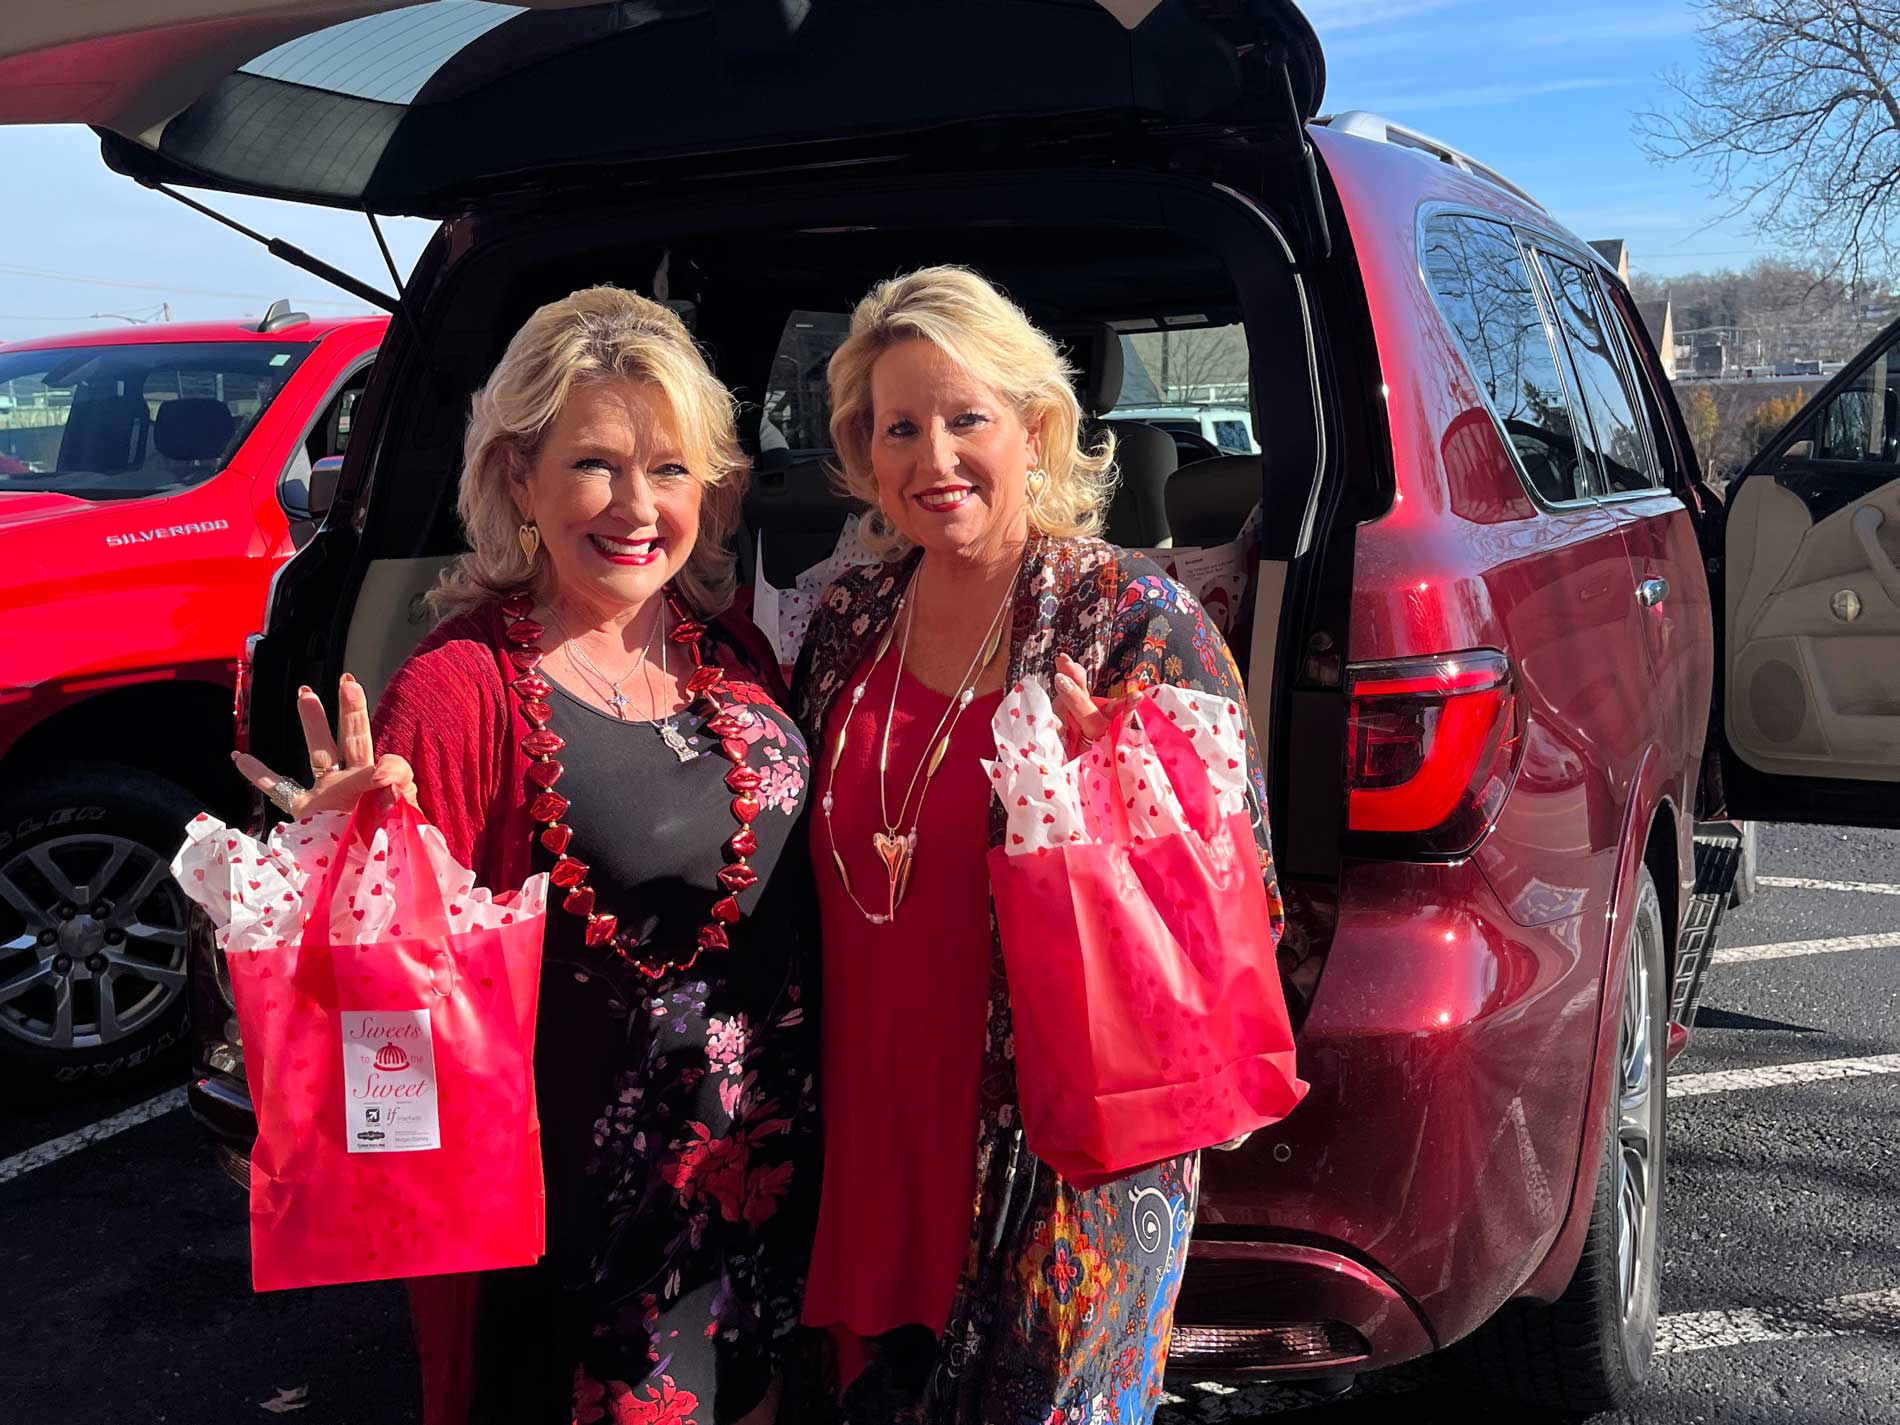 Two women holding pink bags in front of the trunk of a car.